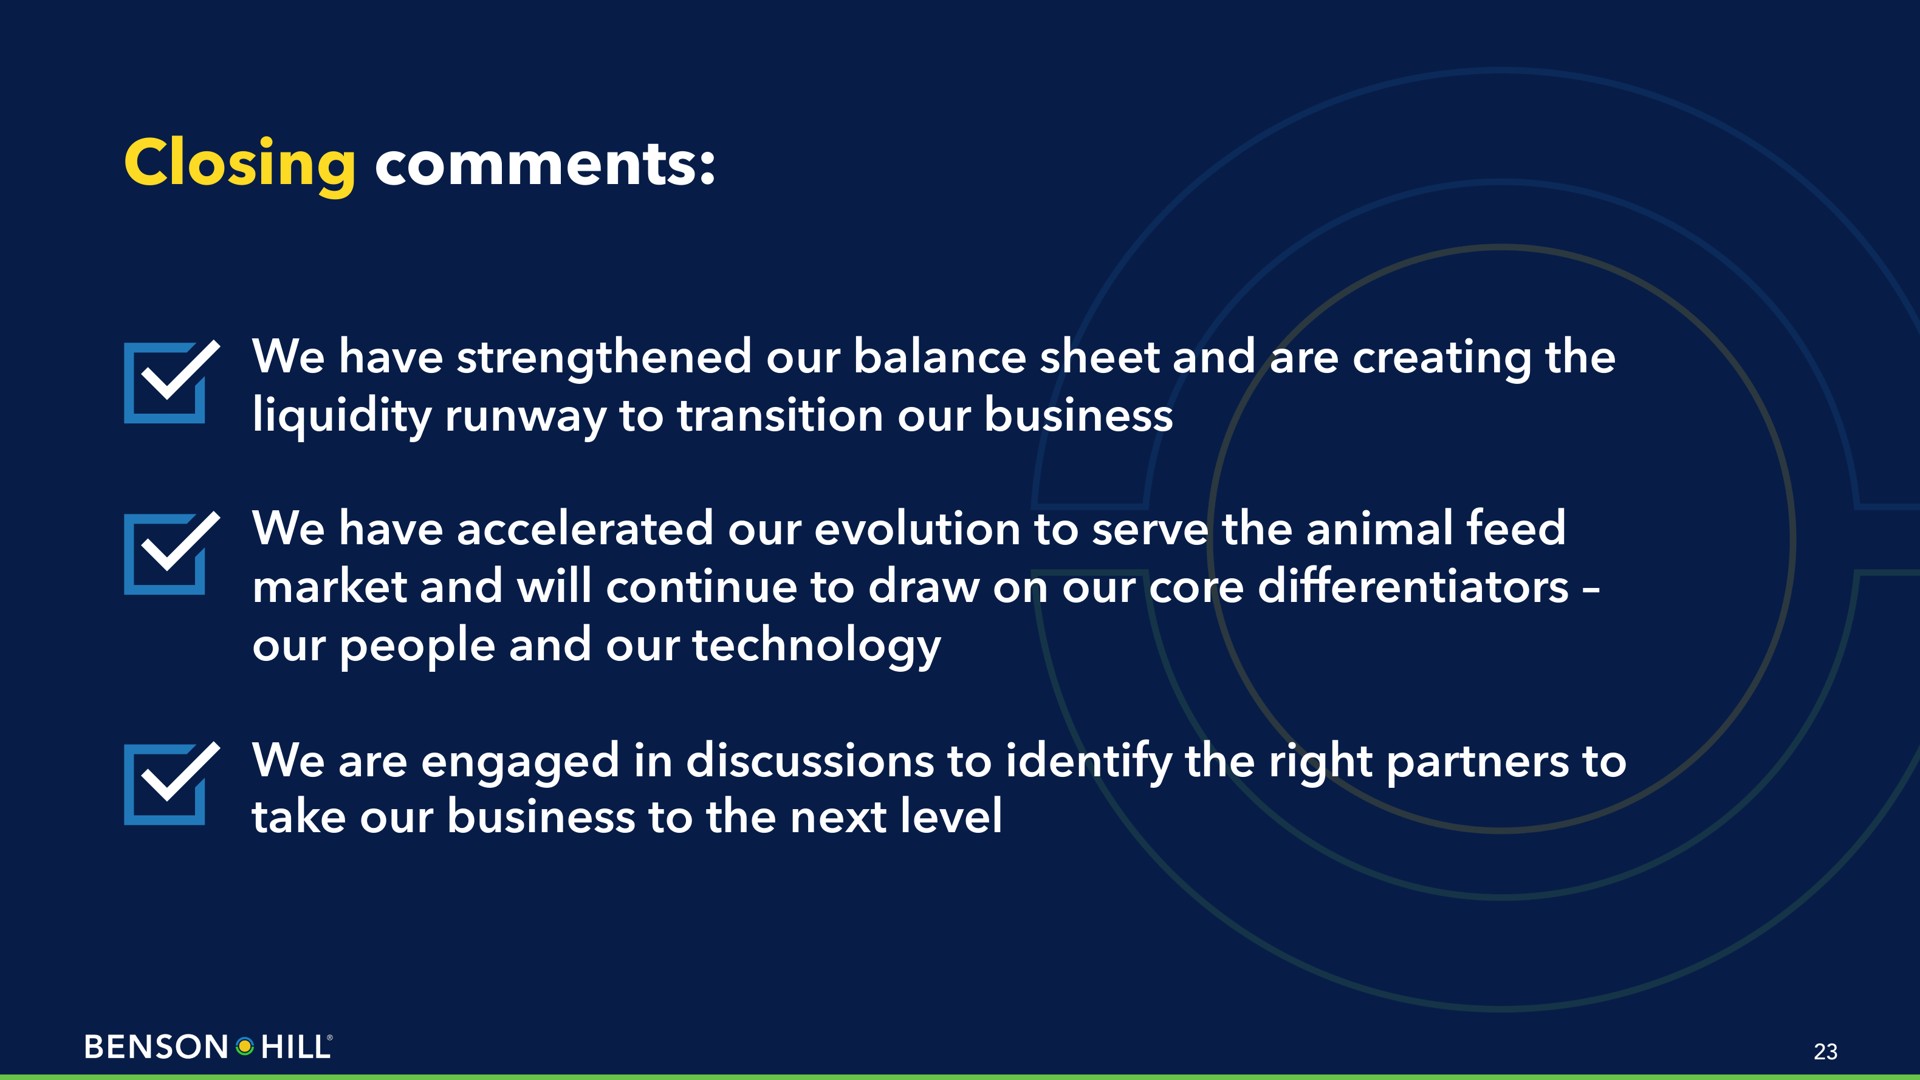 closing comments we have strengthened our balance sheet and are creating the liquidity runway to transition our business we have accelerated our evolution to serve the animal feed market and will continue to draw on our core differentiators our people and our technology we are engaged in discussions to identify the right partners to take our business to the next level | Benson Hill